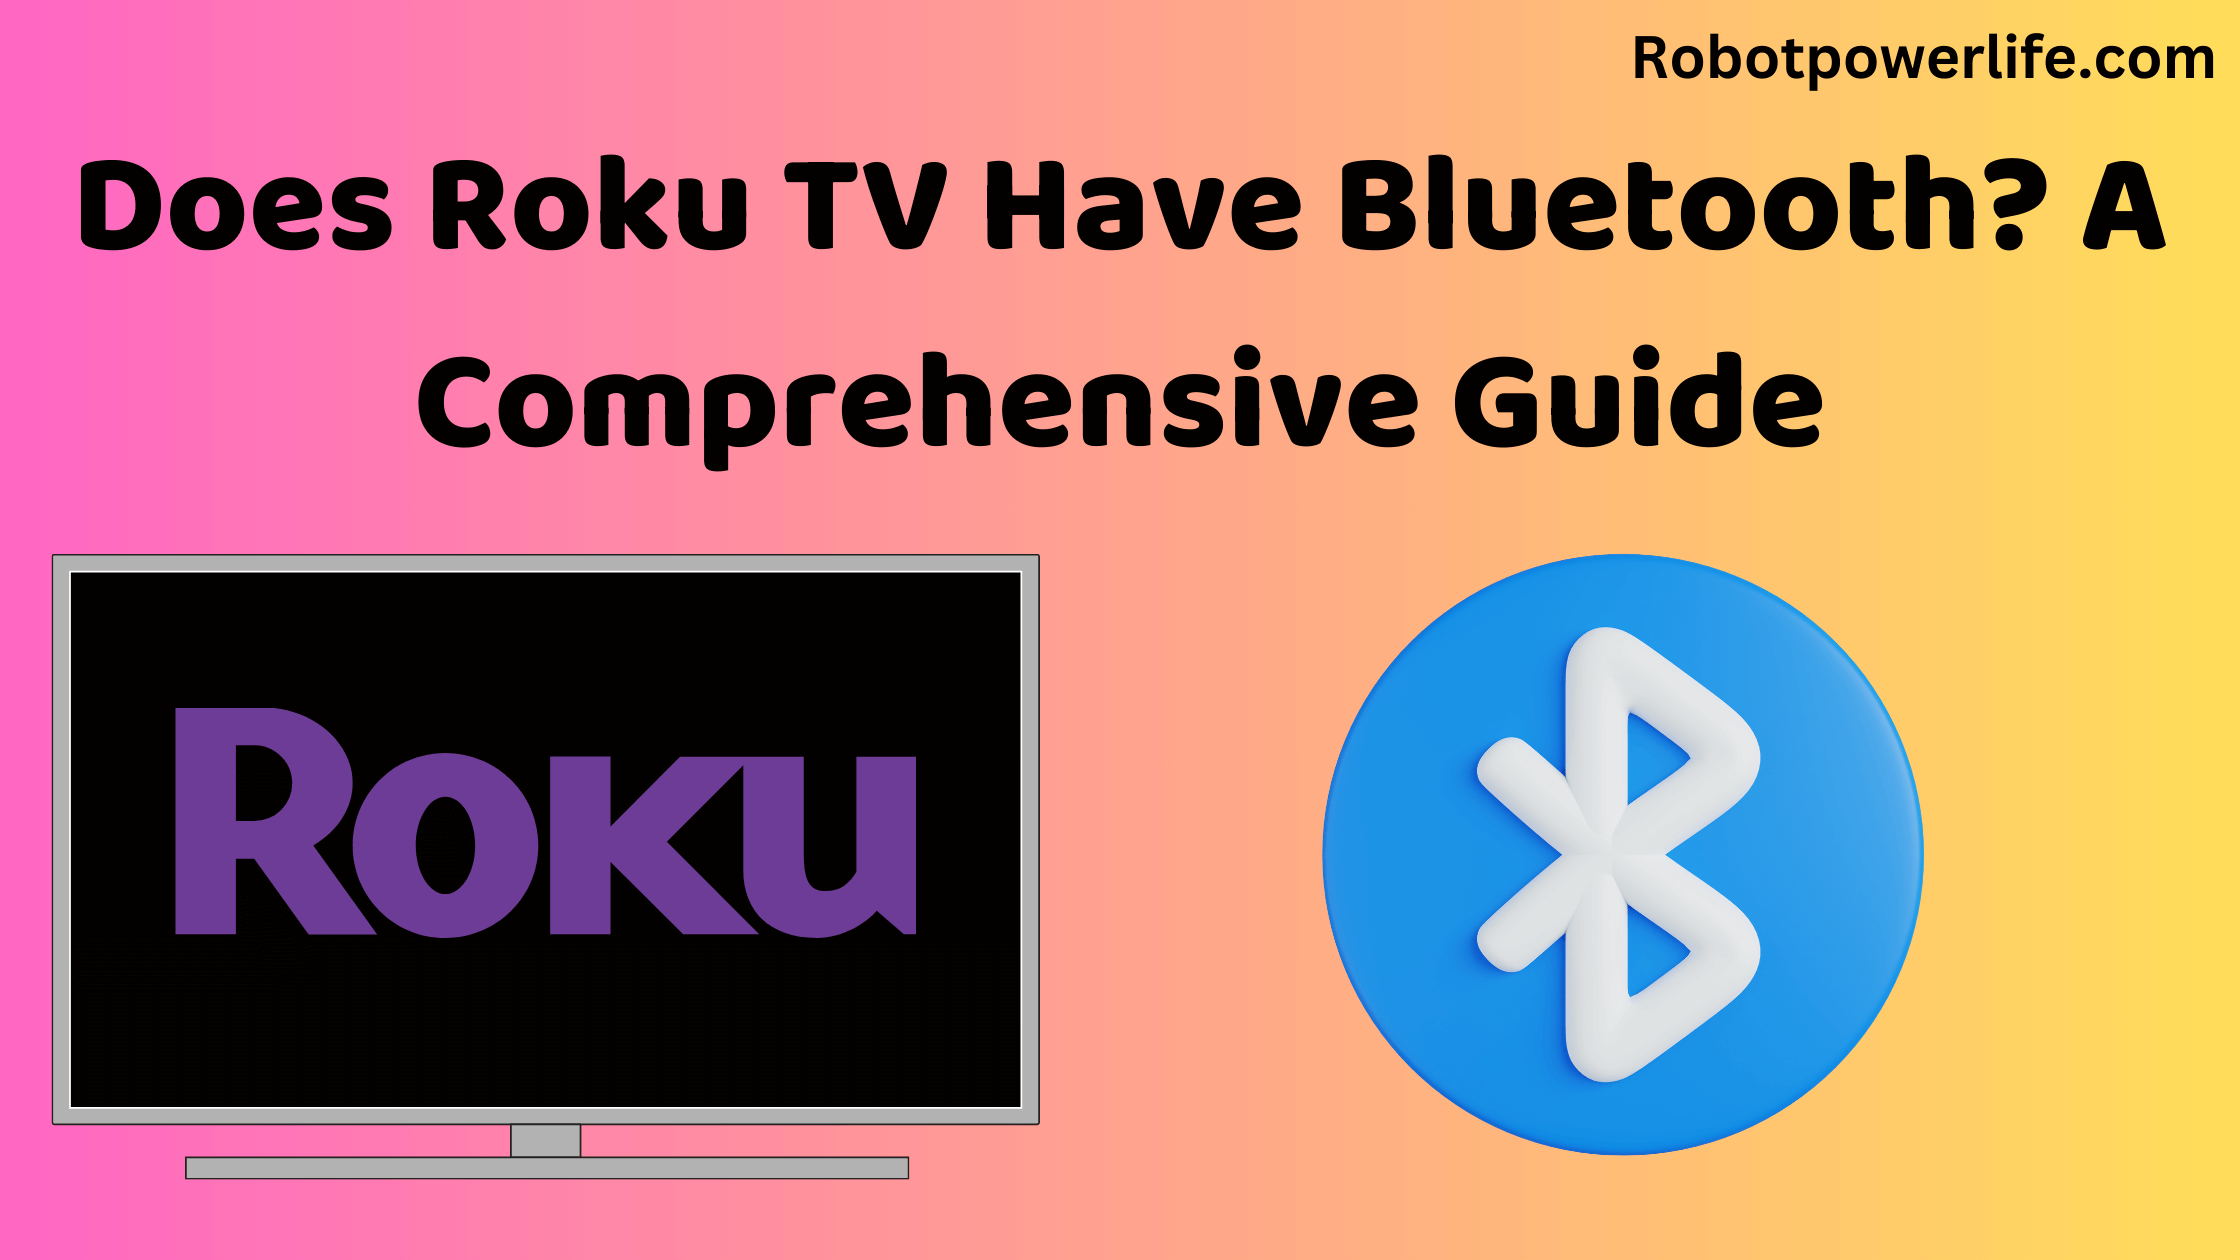 Does Roku TV Have Bluetooth? A Comprehensive Guide